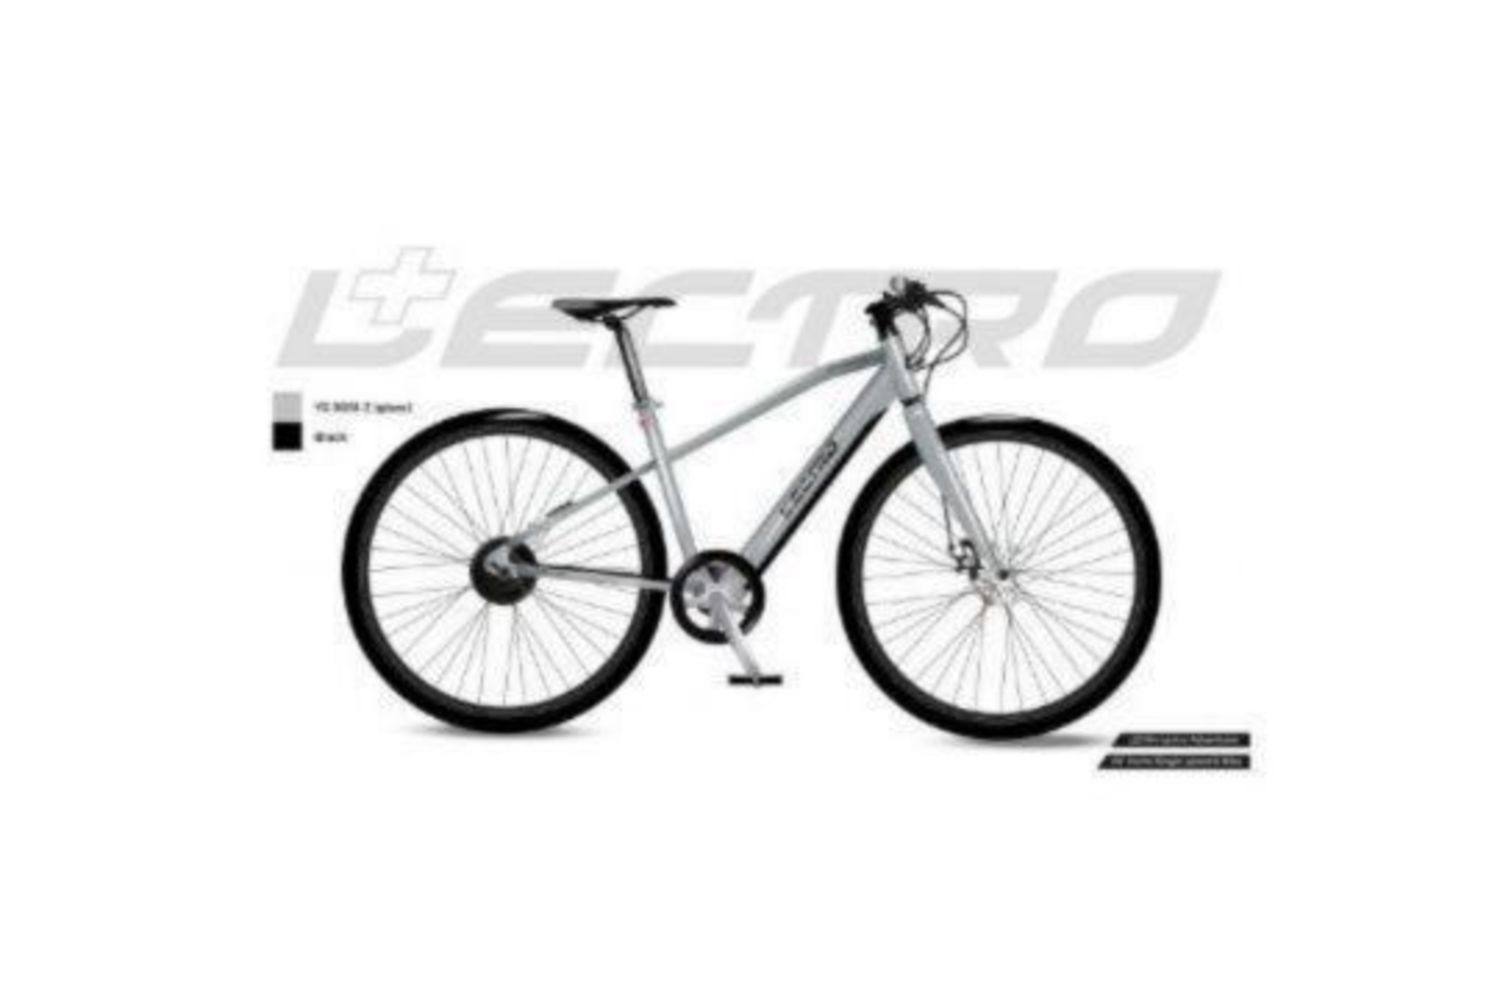 New & Boxed Electric Bikes - Ladies & Gents - Various Designs & Colours - Collection & Delivery Available